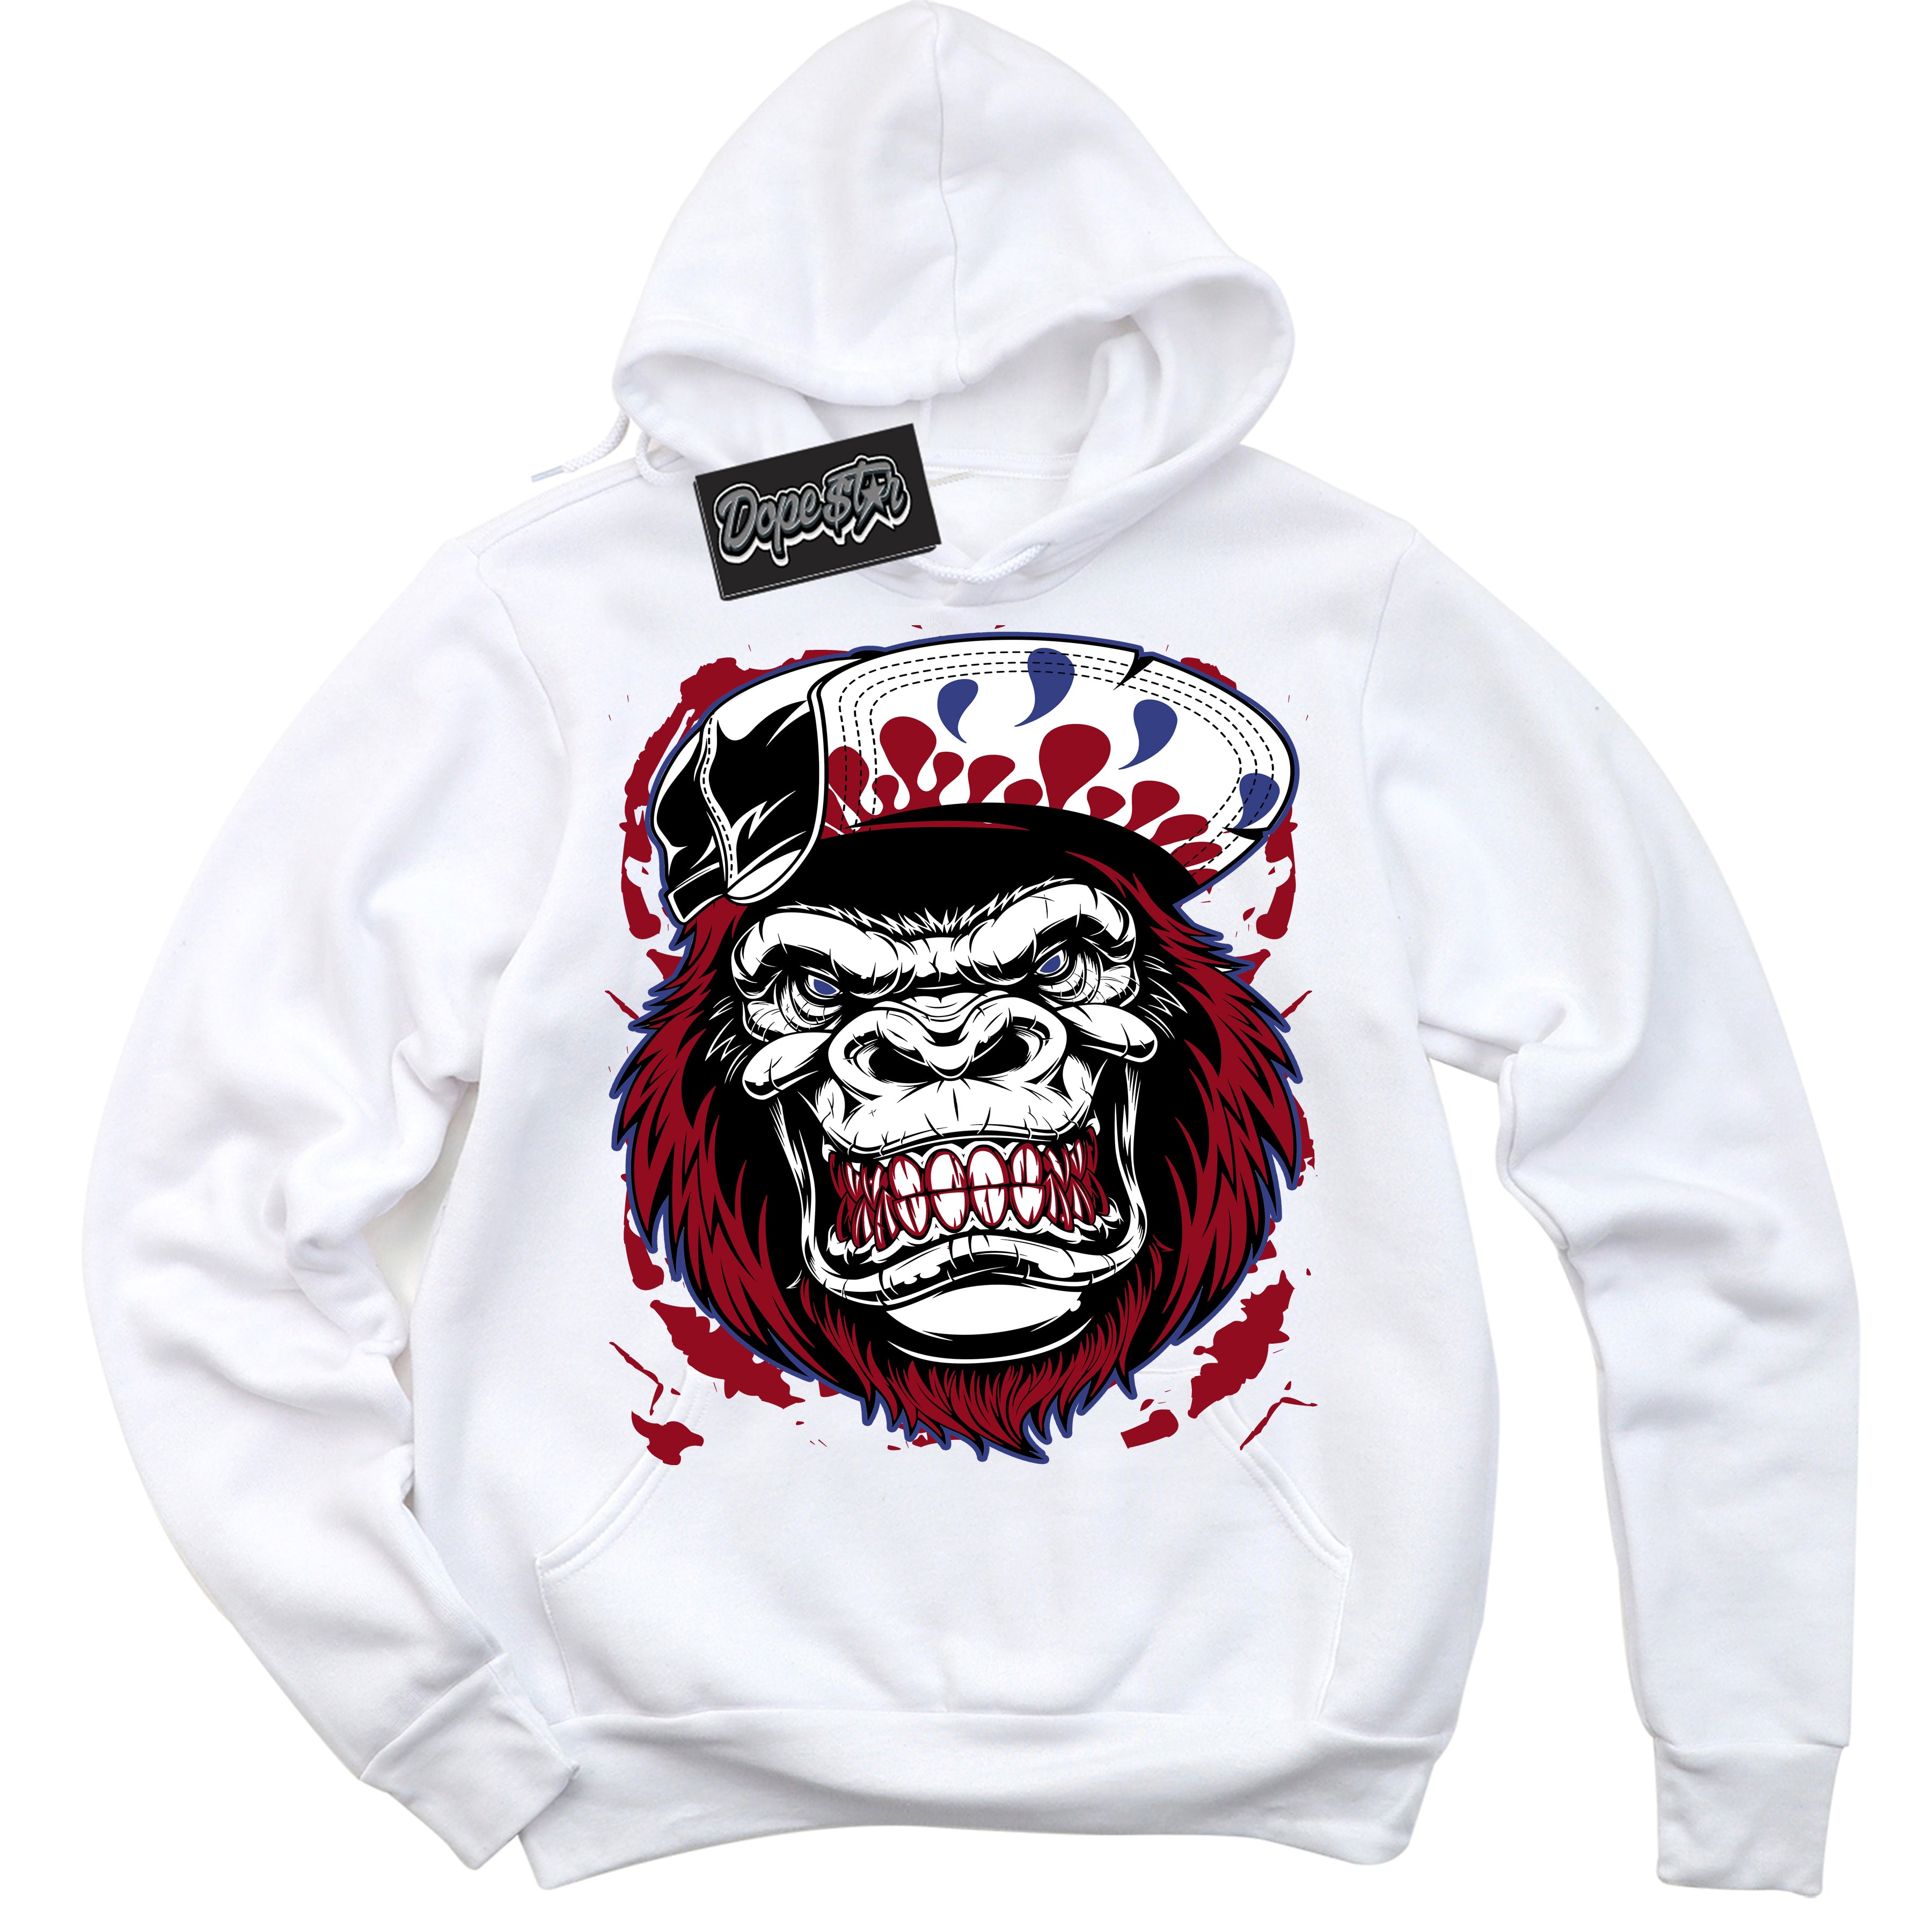 Cool White Hoodie with “ Gorilla Beast ”  design that Perfectly Matches Playoffs 8s Sneakers.